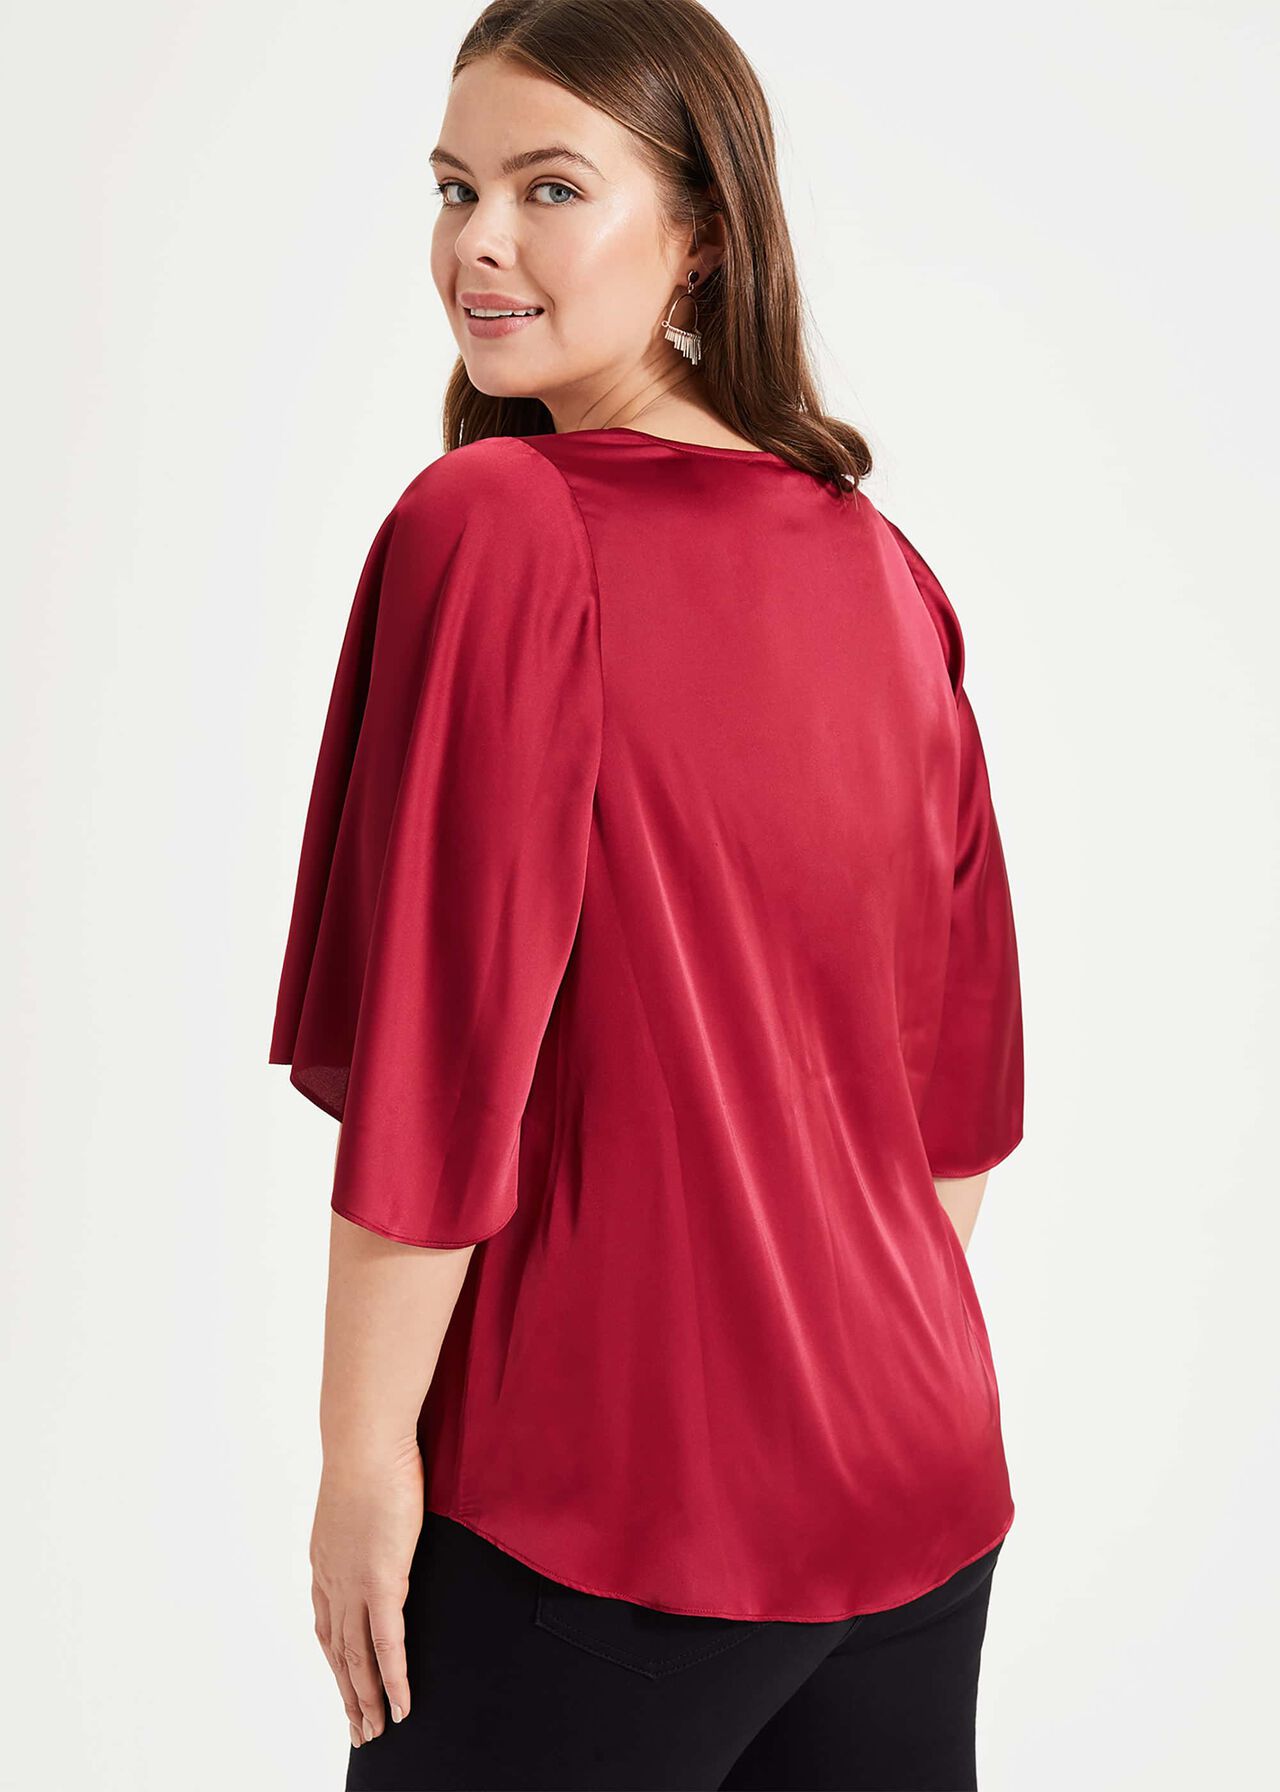 Milly Satin Top